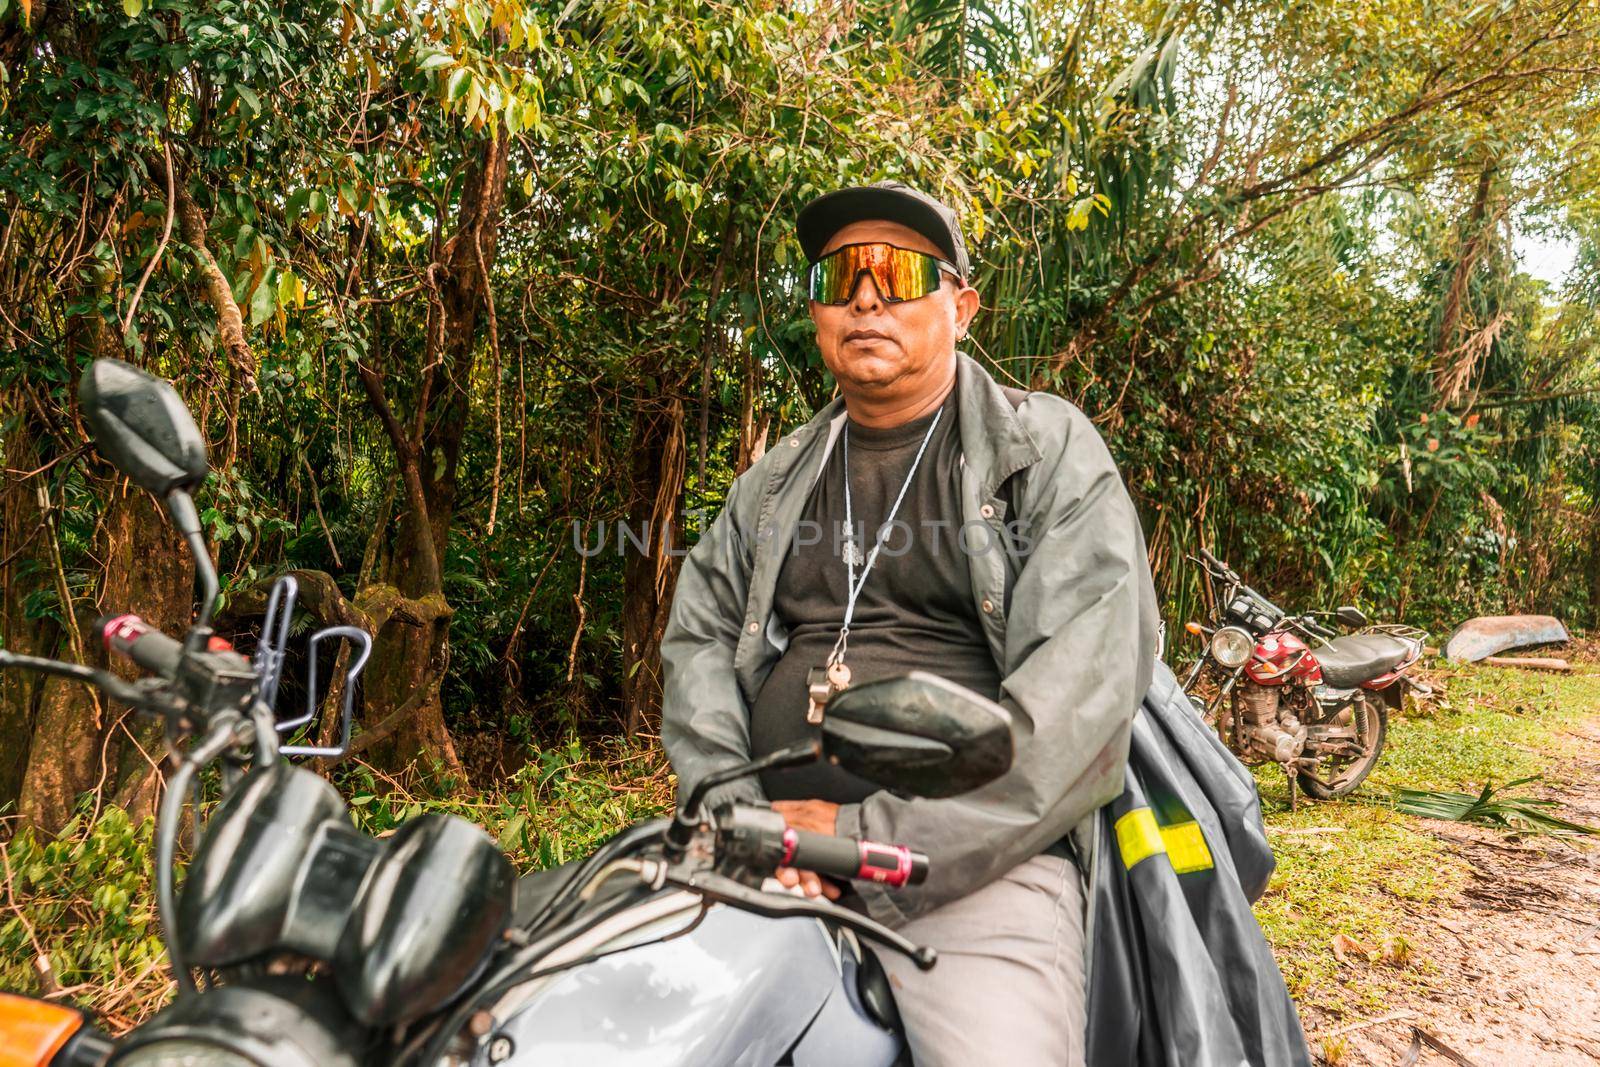 Indigenous man riding a motorbike in a Caribbean community of Nicaragua